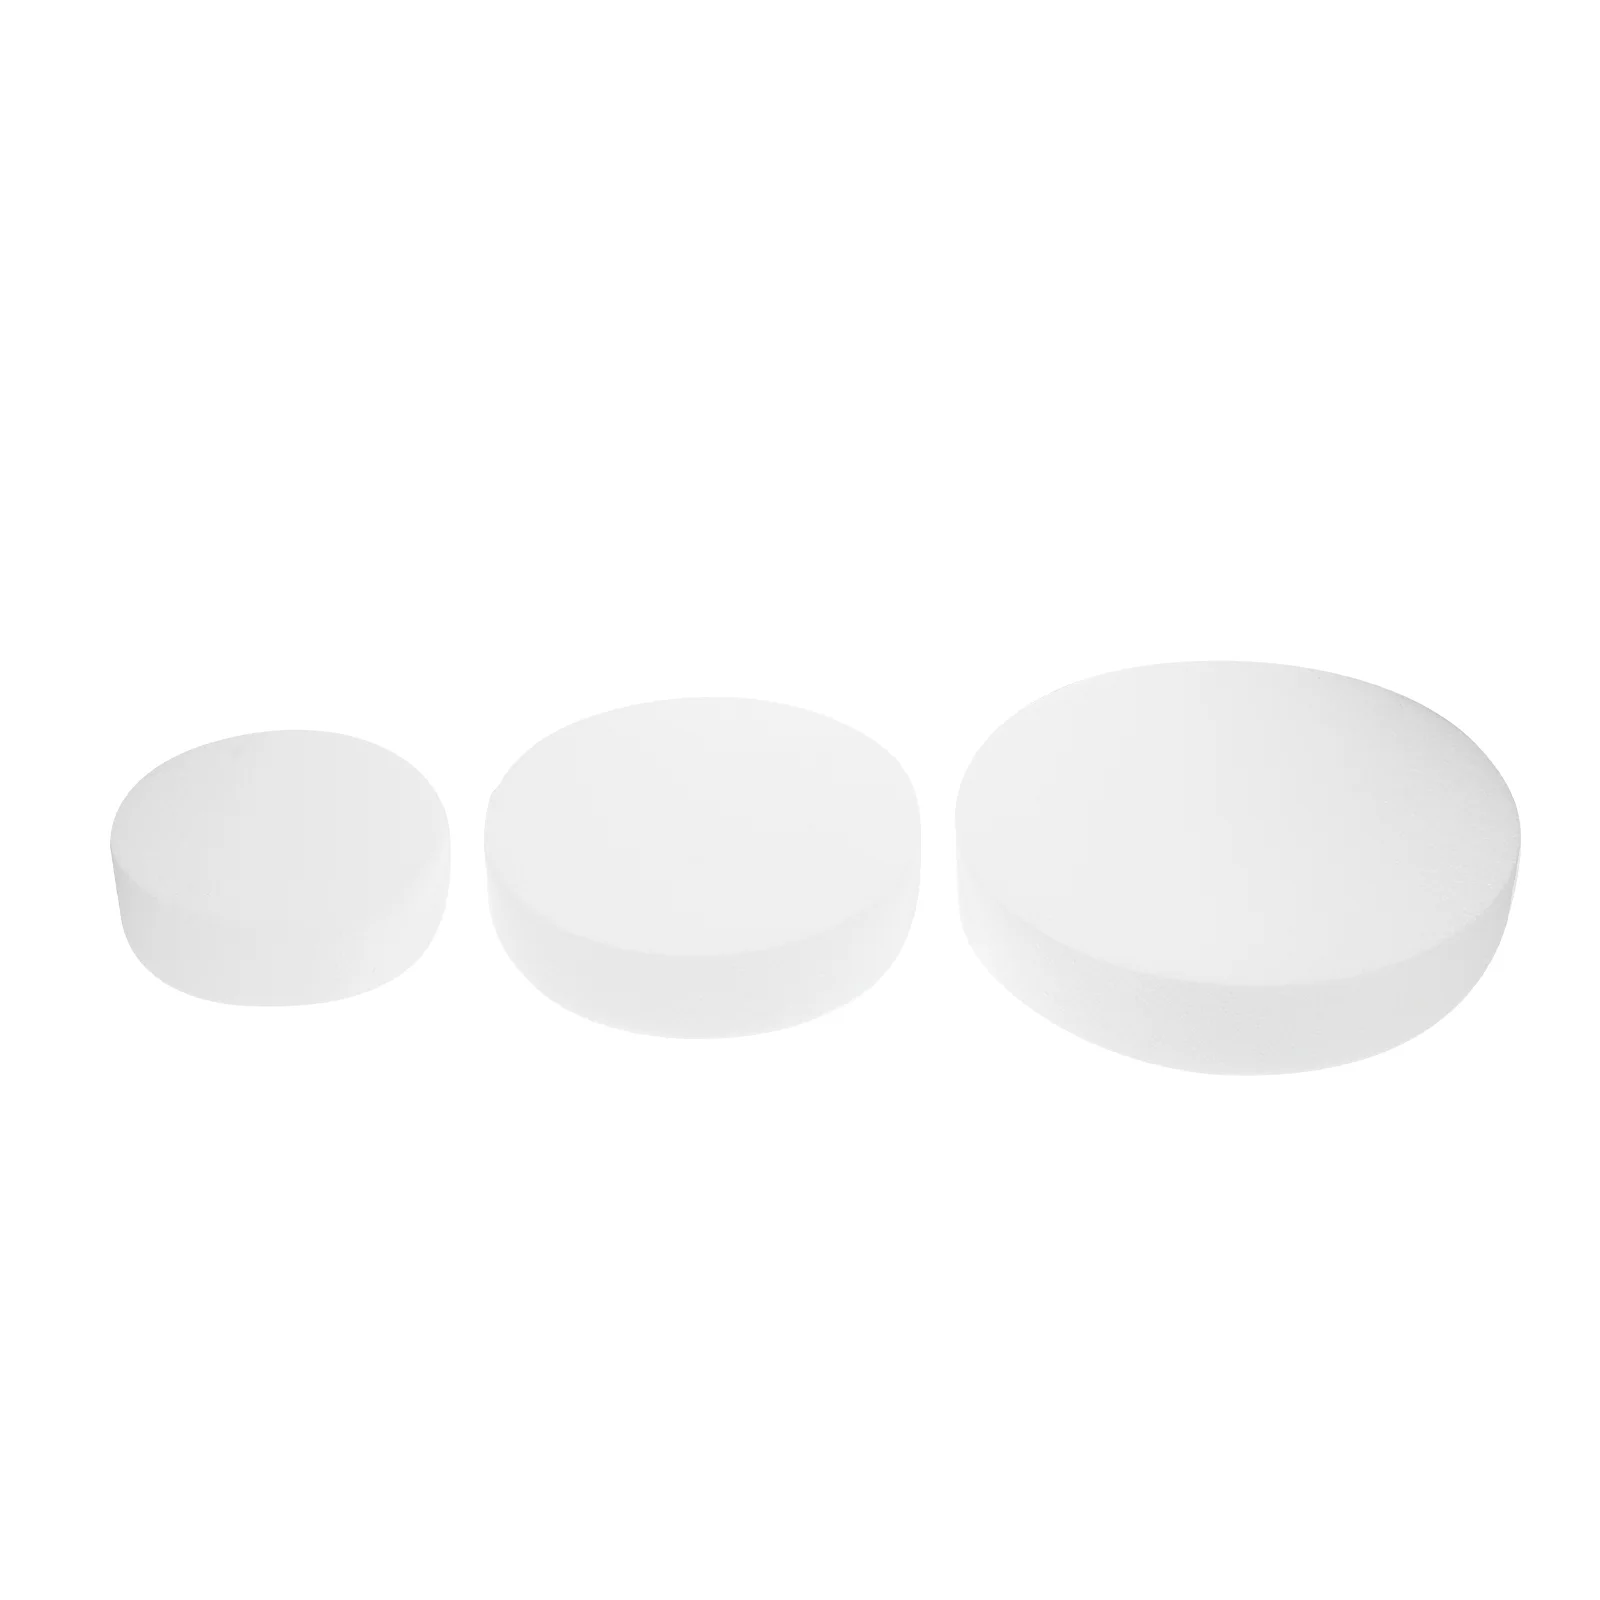 

3 Pcs Polystyrene Cake Shapes Dummy Foam Round White Stands Circles Dummies Model Molds Tier